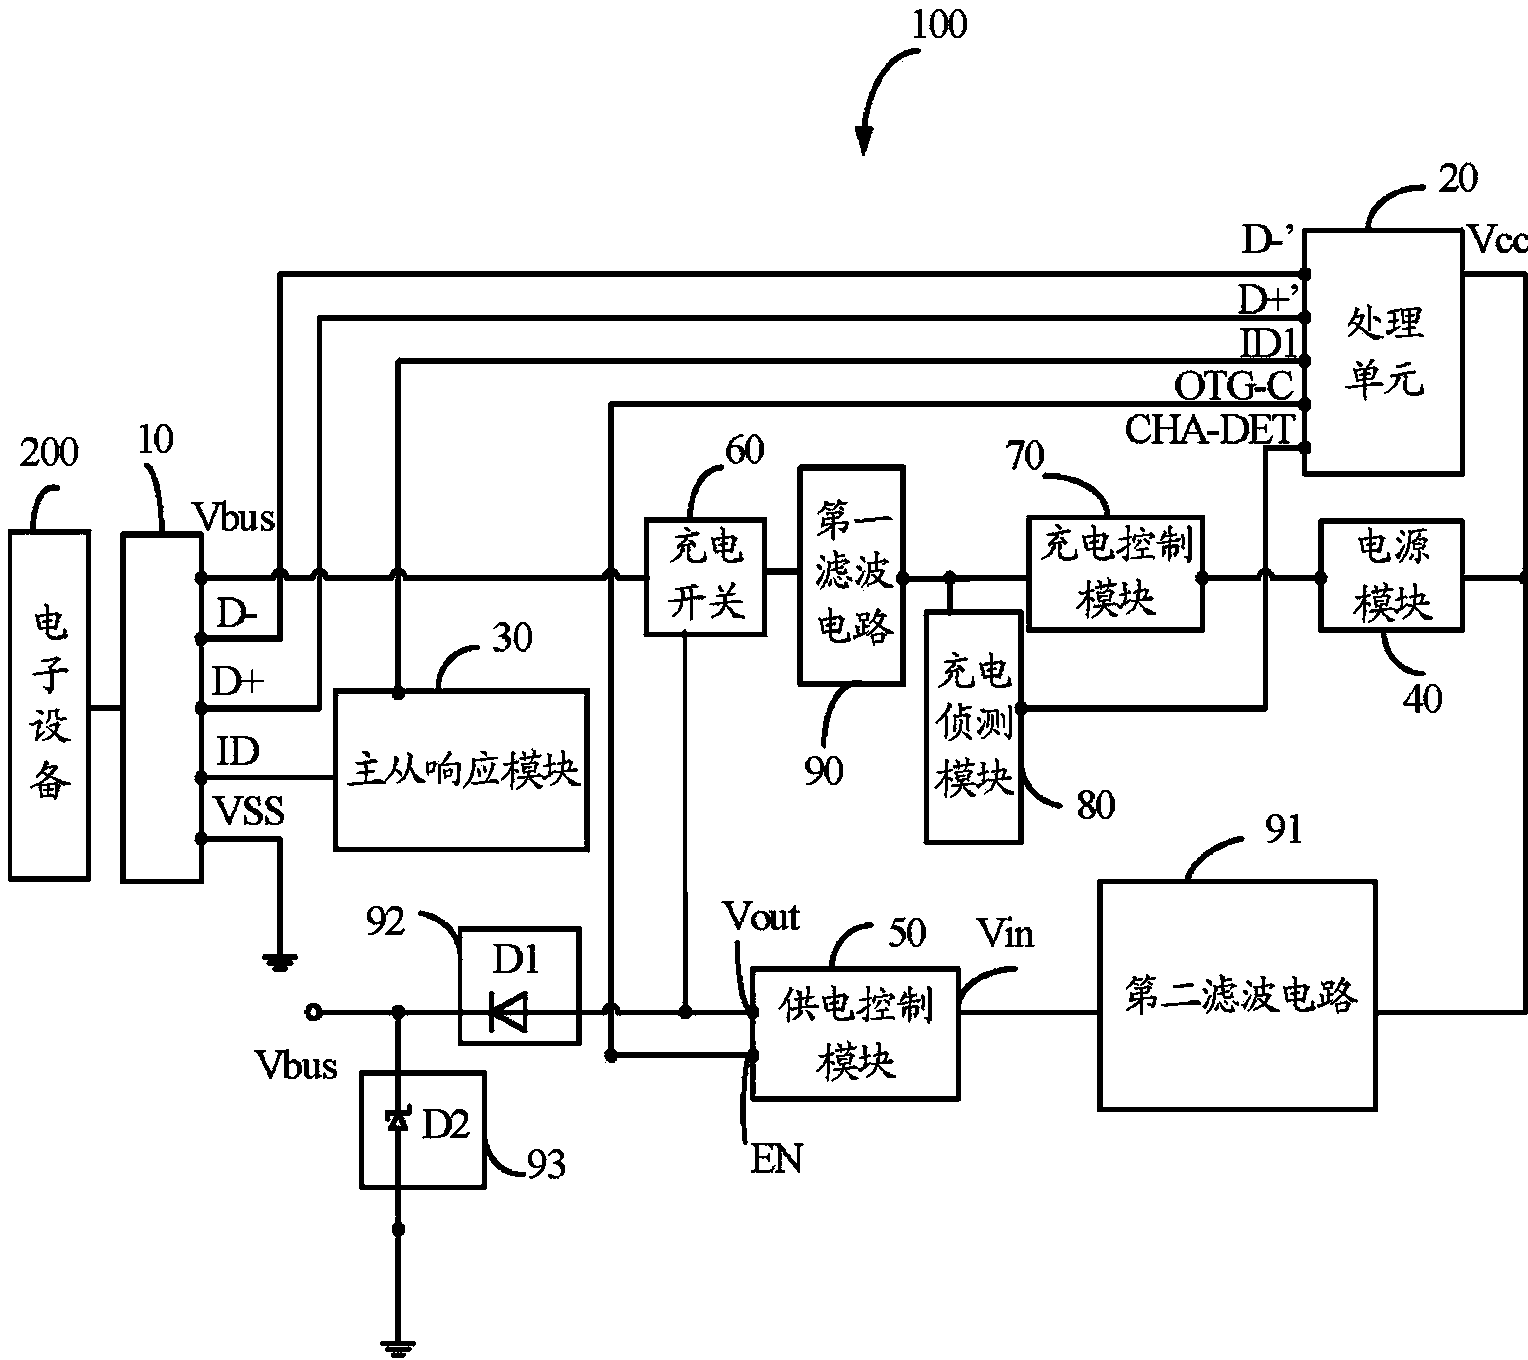 Electronic device with universal serial bus (USB) interface with integration function